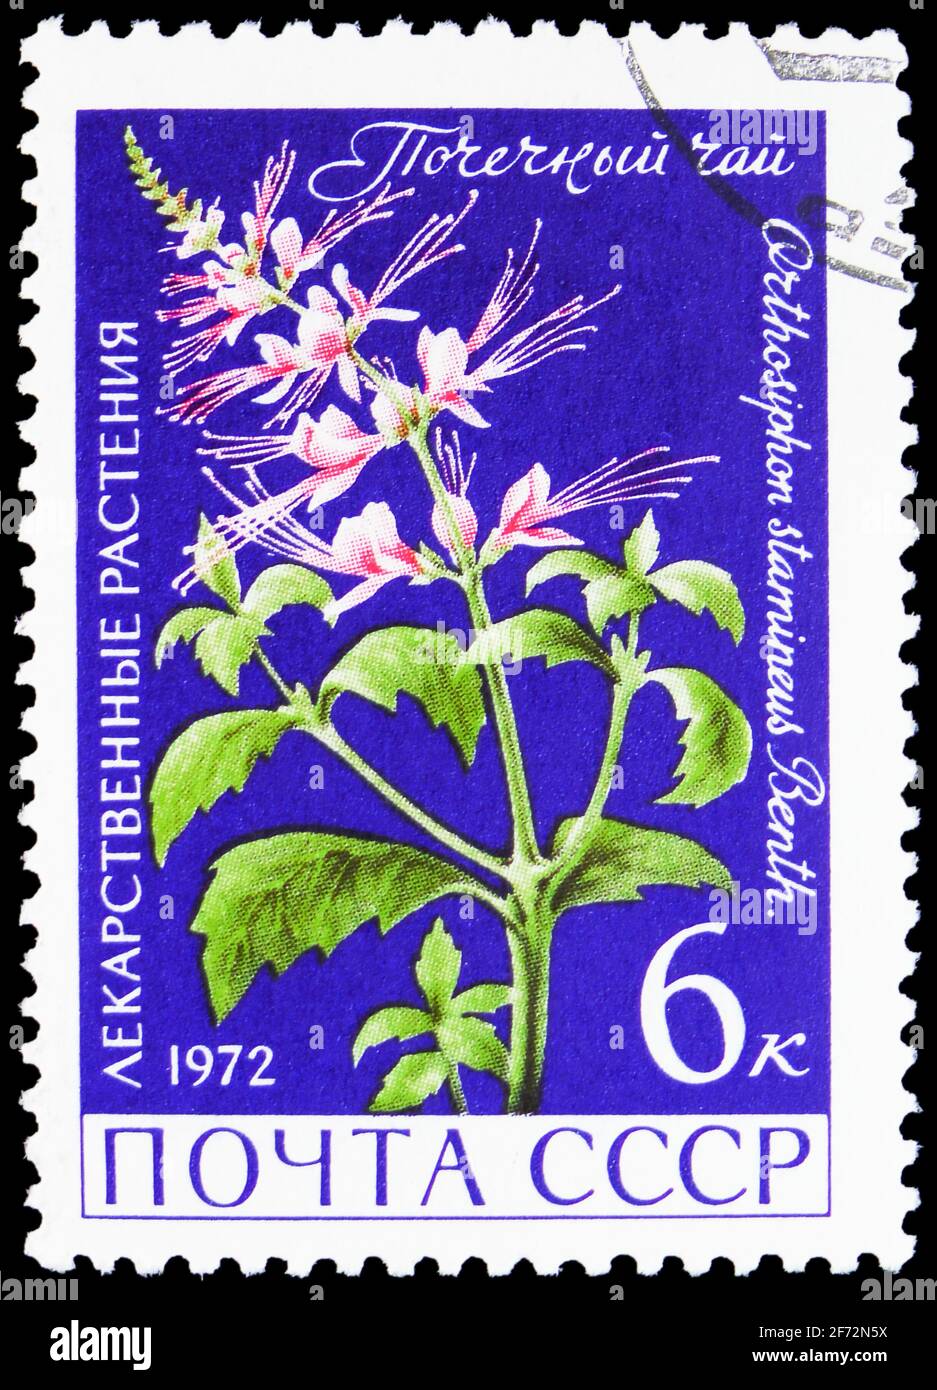 MOSCOW, RUSSIA - JANUARY 12, 2021: Postage stamp printed in USSR (Russia) shows Orthsiphon stamineus, Medicinal Plants serie, circa1972 Stock Photo